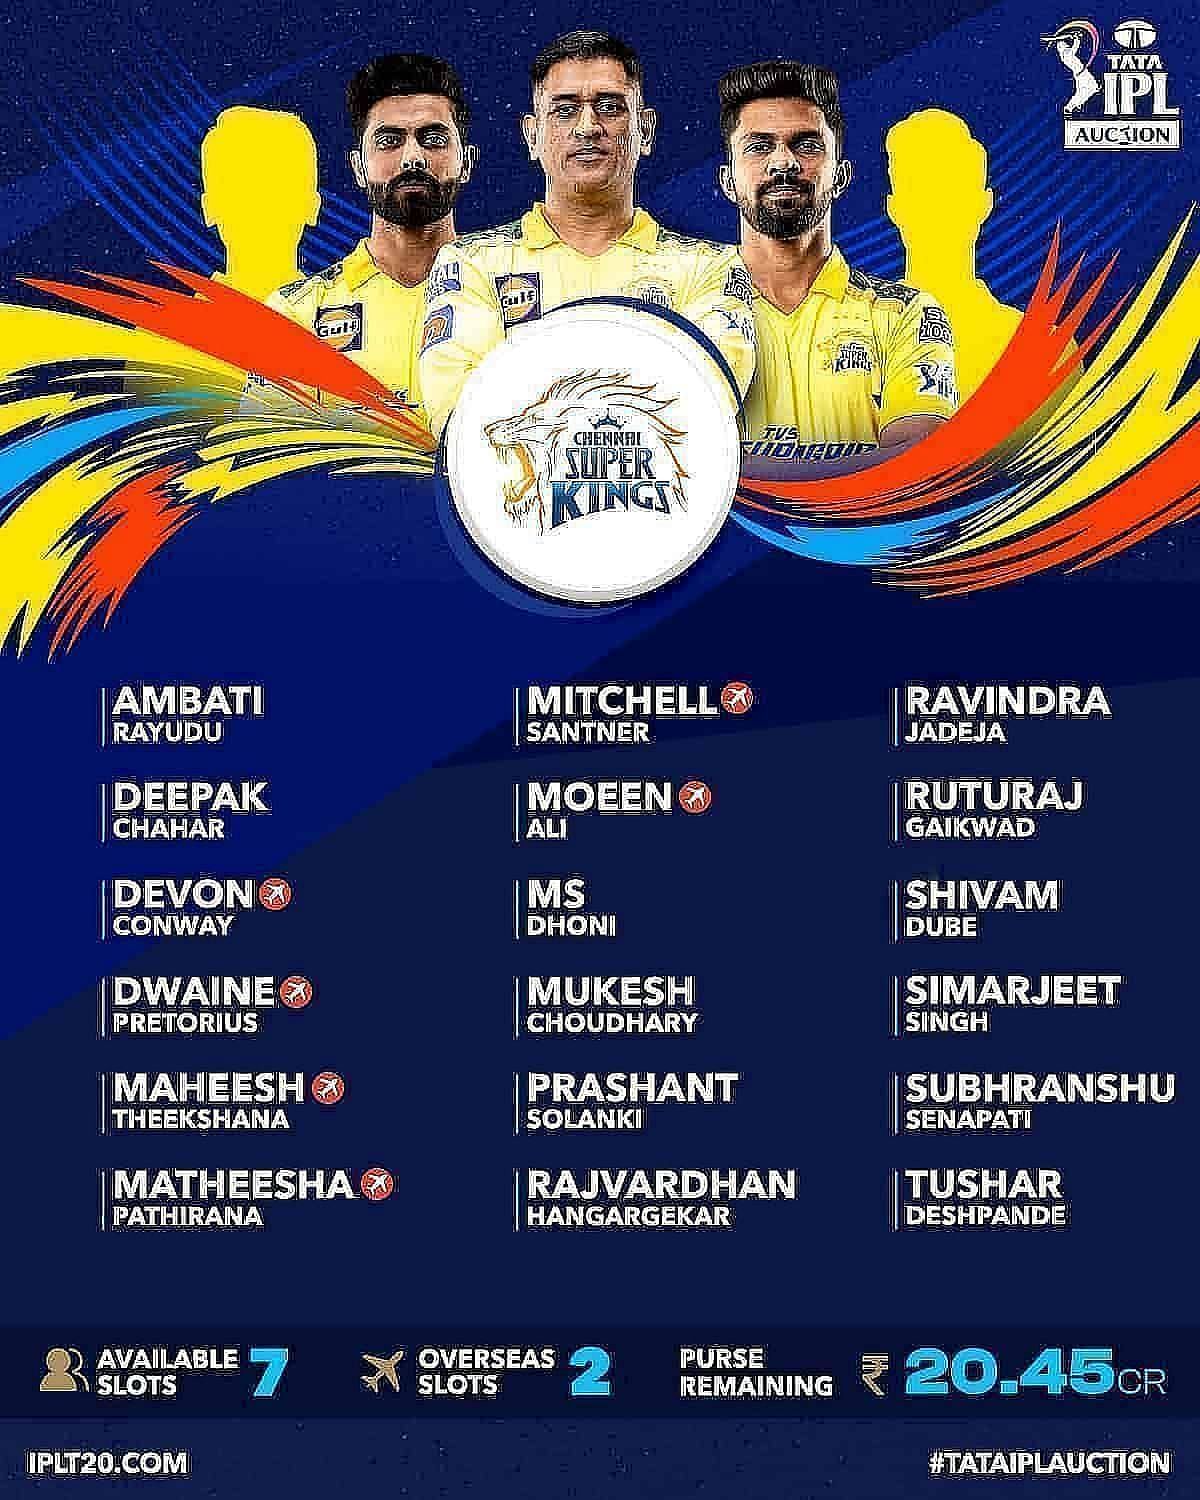 &lt;span class=&#039;entity-link&#039; id=&#039;suggestBtn-14&#039;&gt;IPL&lt;/span&gt;-2023-Auction-&lt;span class=&#039;entity-link&#039; id=&#039;suggestBtn-10&#039;&gt;CSK&lt;/span&gt;-Squads-Purse-Remaining-Available-Slots-of-Chennai-Super-Kings.jpg (1200&times;1500)